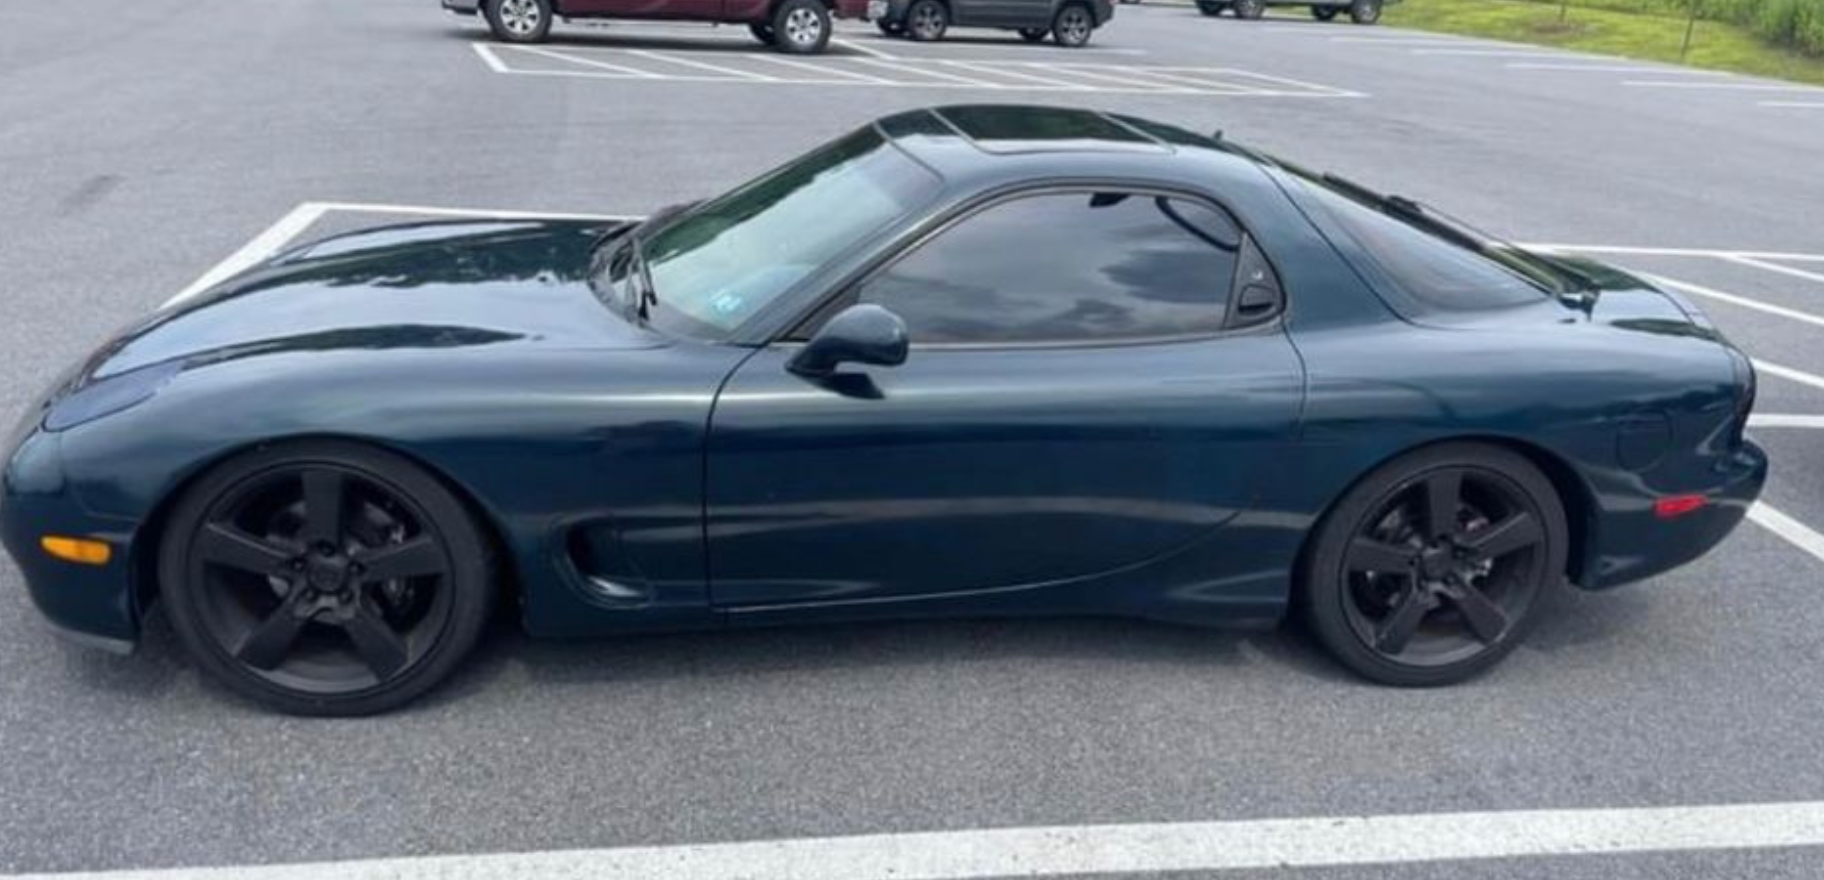 Wheels and Tires/Axles - 18" RX-8 Wheels and Tires - Used - 1993 to 2002 Mazda RX-7 - Fort Worth, TX 76111, United States